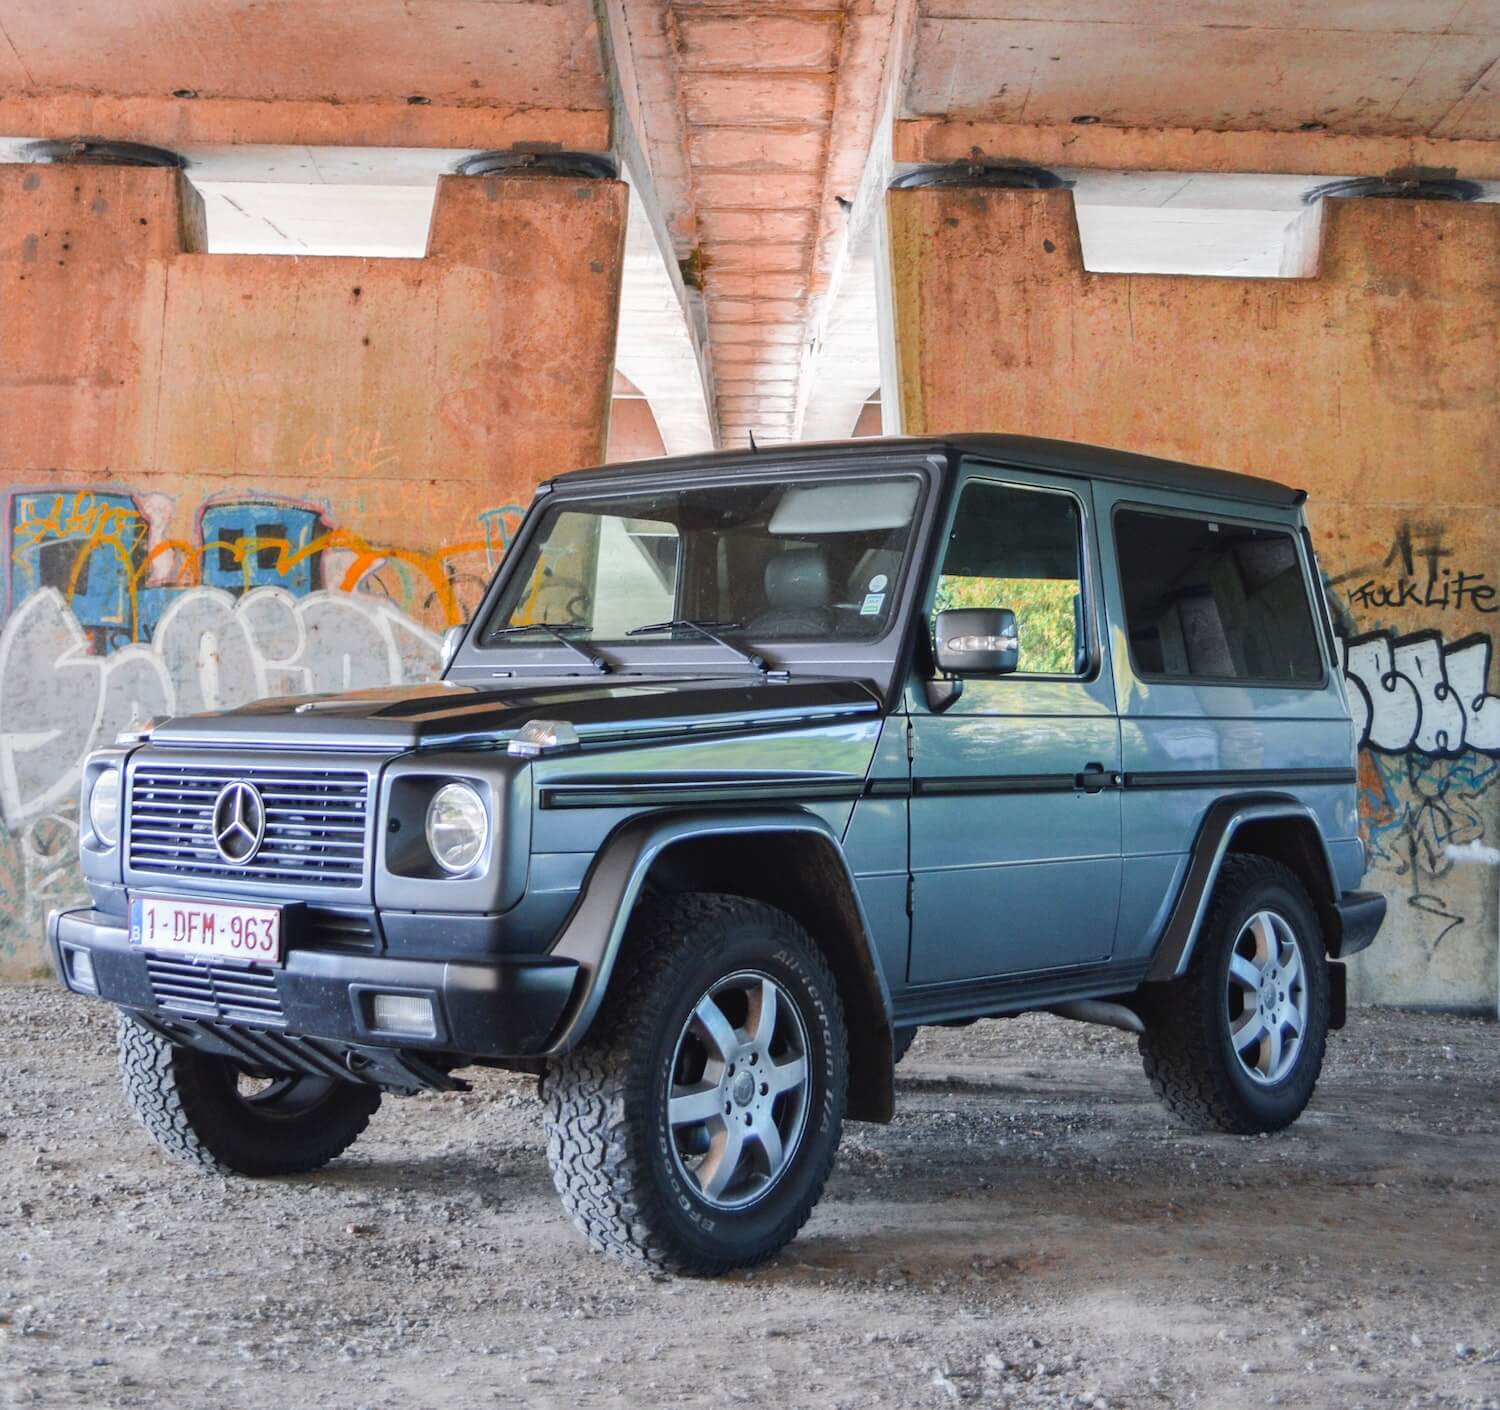 A two-door, used Mercedes-Benz G wagon in blue, parked in front of a wall of graffiti.